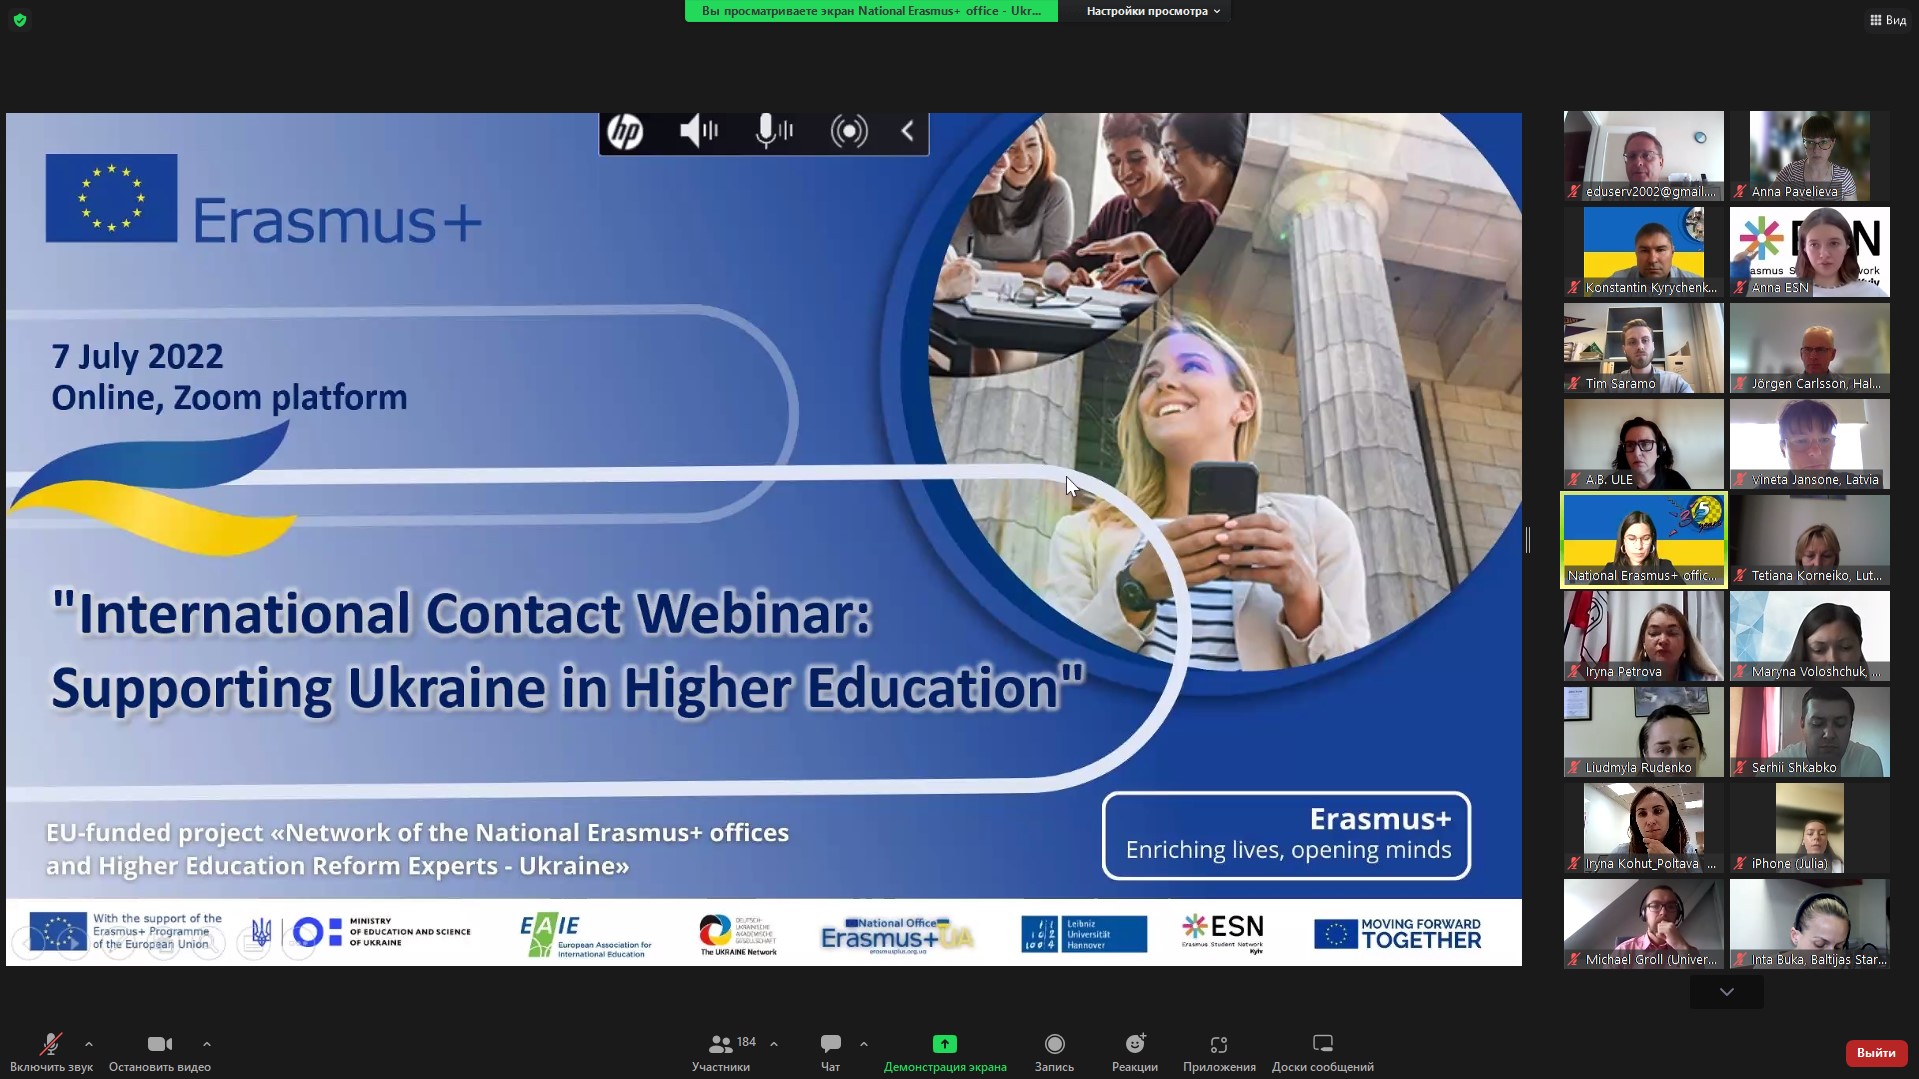 The scientist takes part in a webinar on Supporting Ukrainian Higher Education Institutions in Times of War